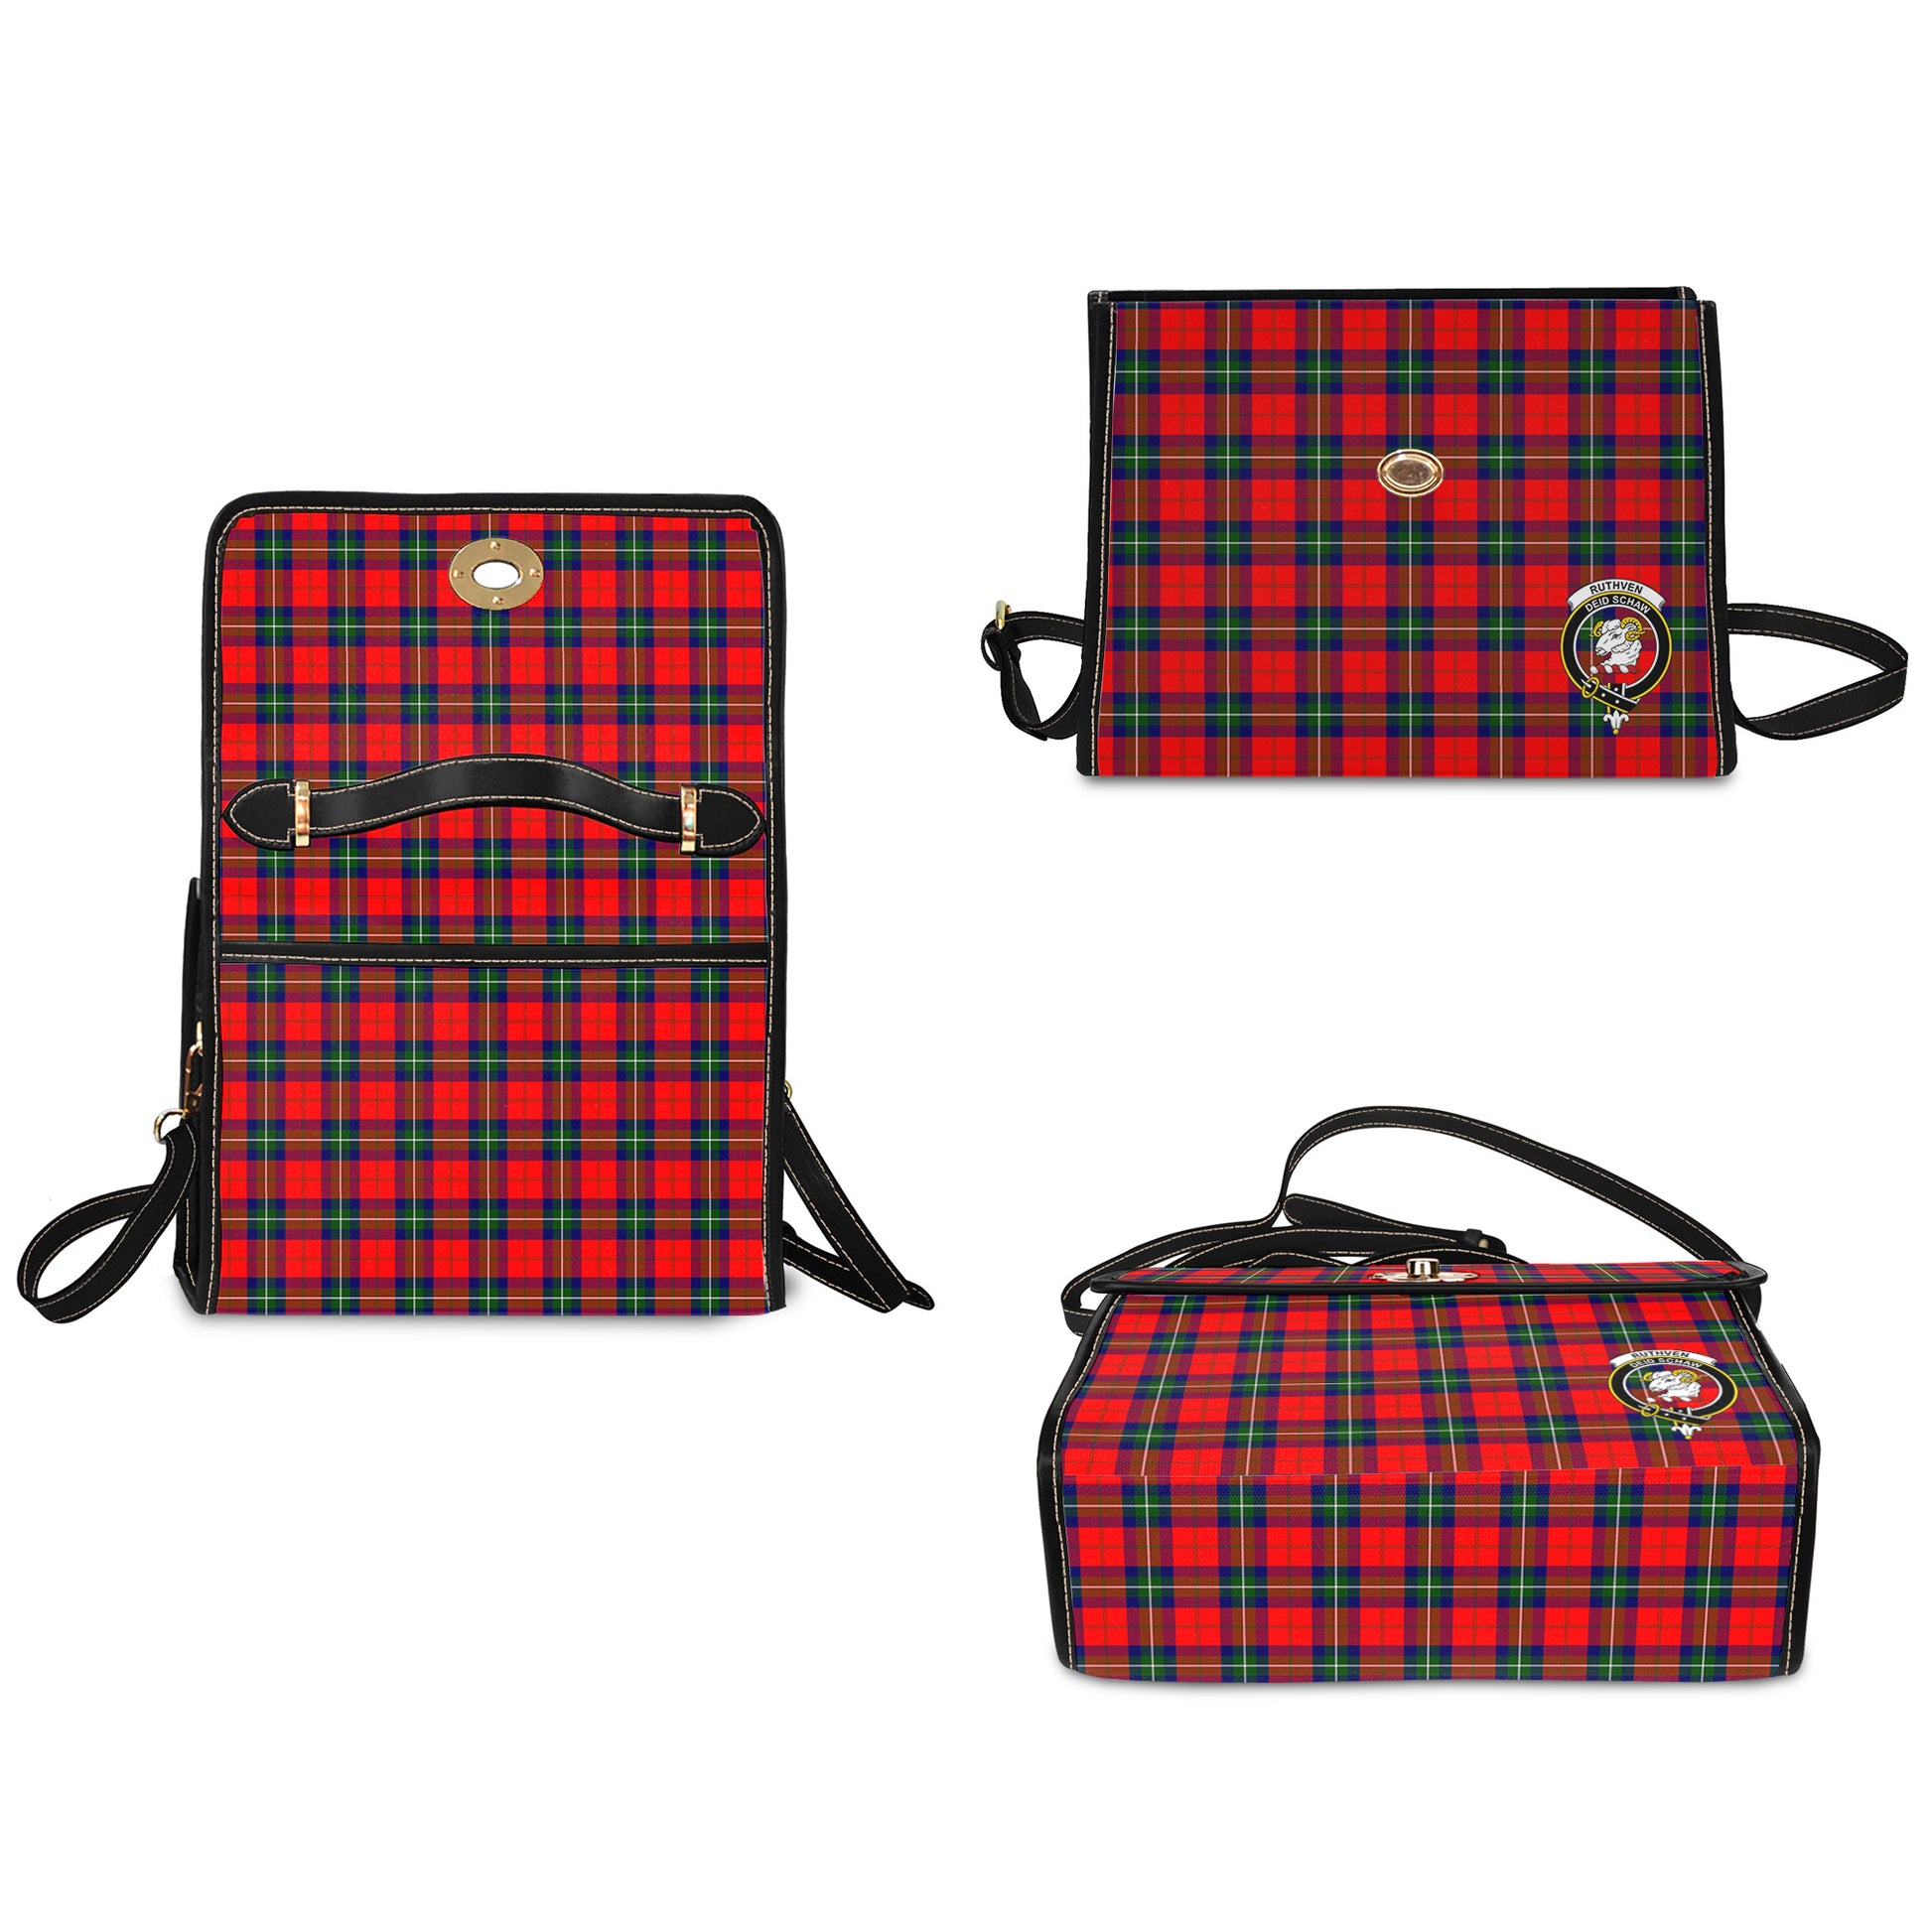 ruthven-modern-tartan-leather-strap-waterproof-canvas-bag-with-family-crest